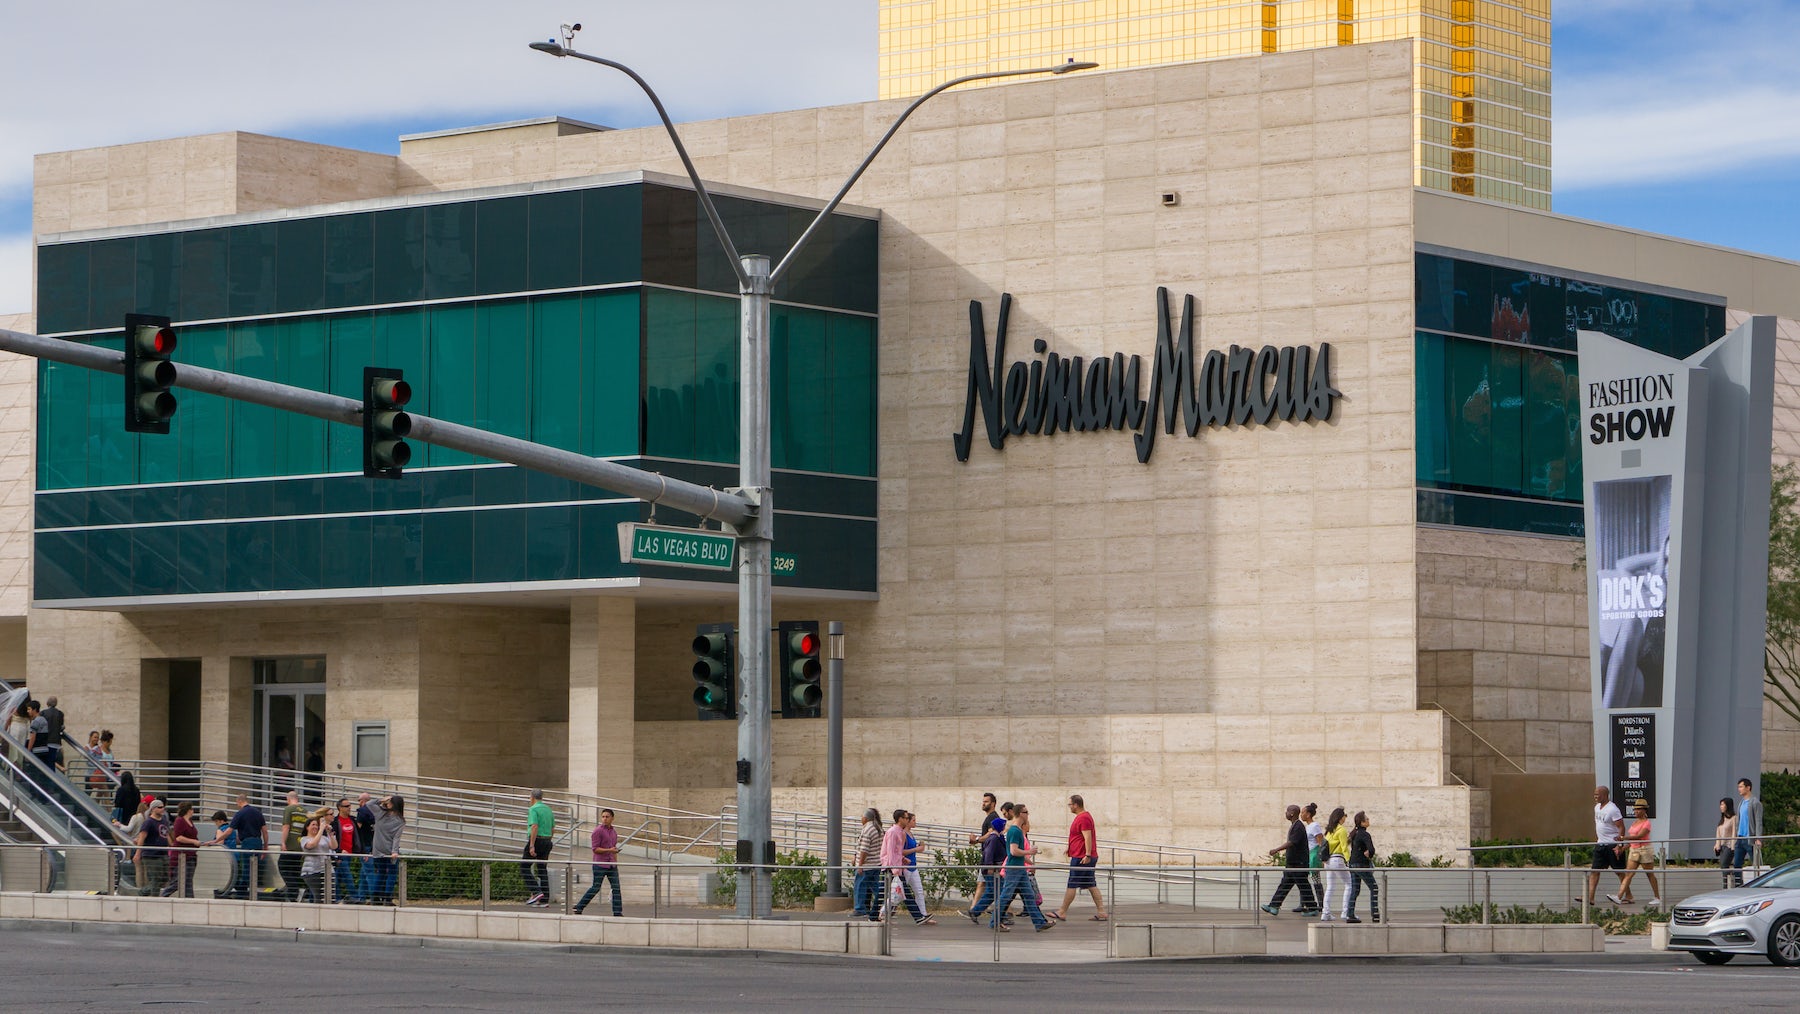 Neiman Marcus Considers Selling Itself to Rival Saks Fifth Avenue